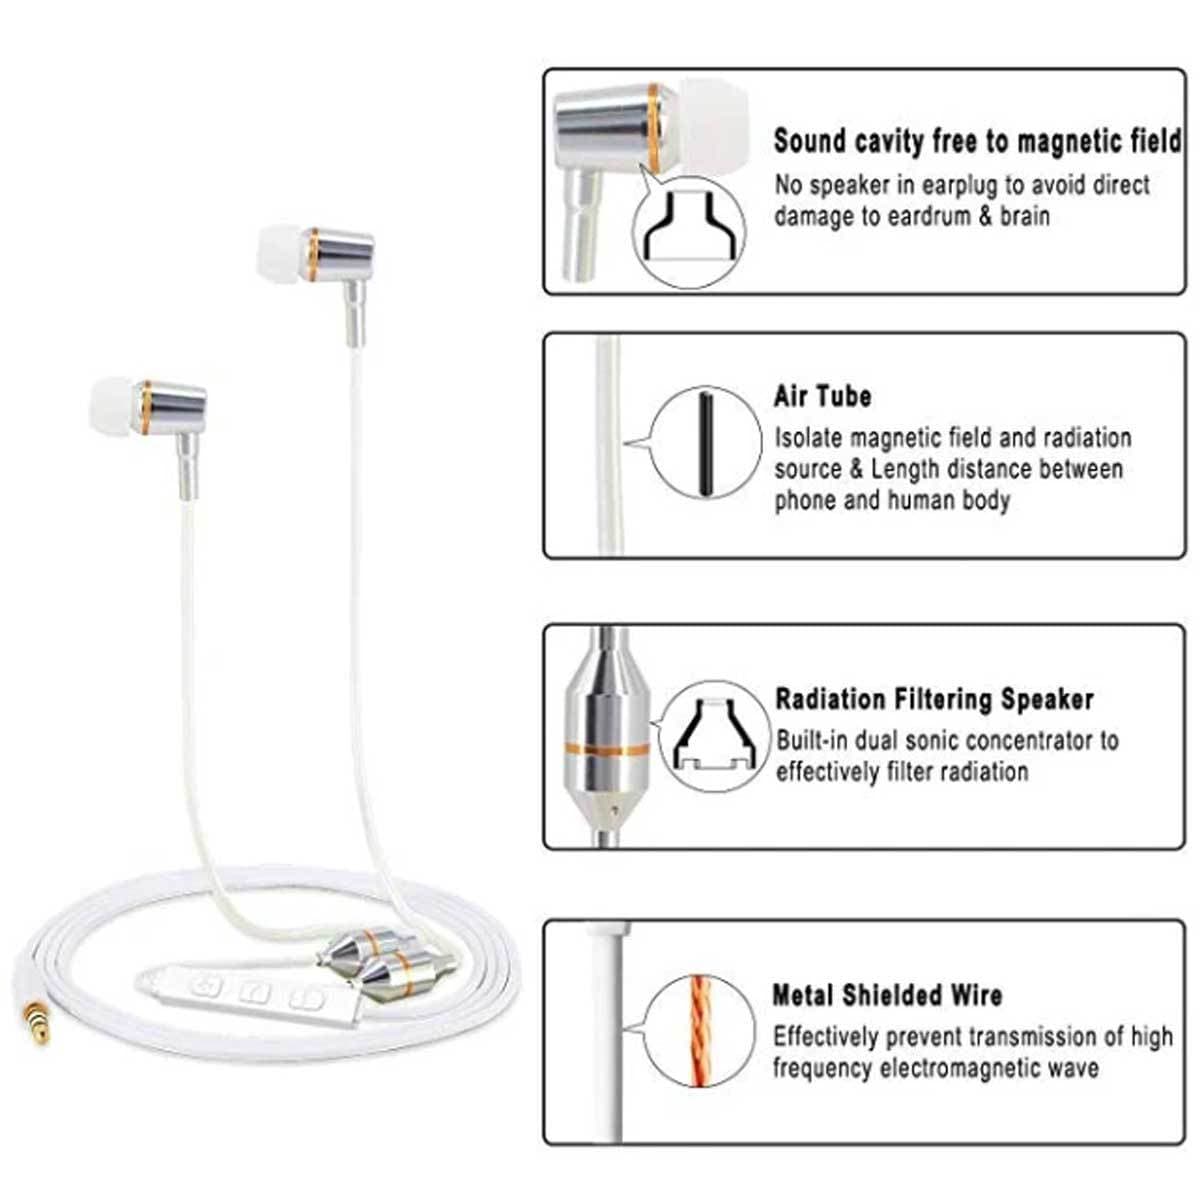 EMF Blocking, Radiation Protection Headphones/Ear Buds - Air Tube Technology Conners Clinic Equipment - Conners Clinic